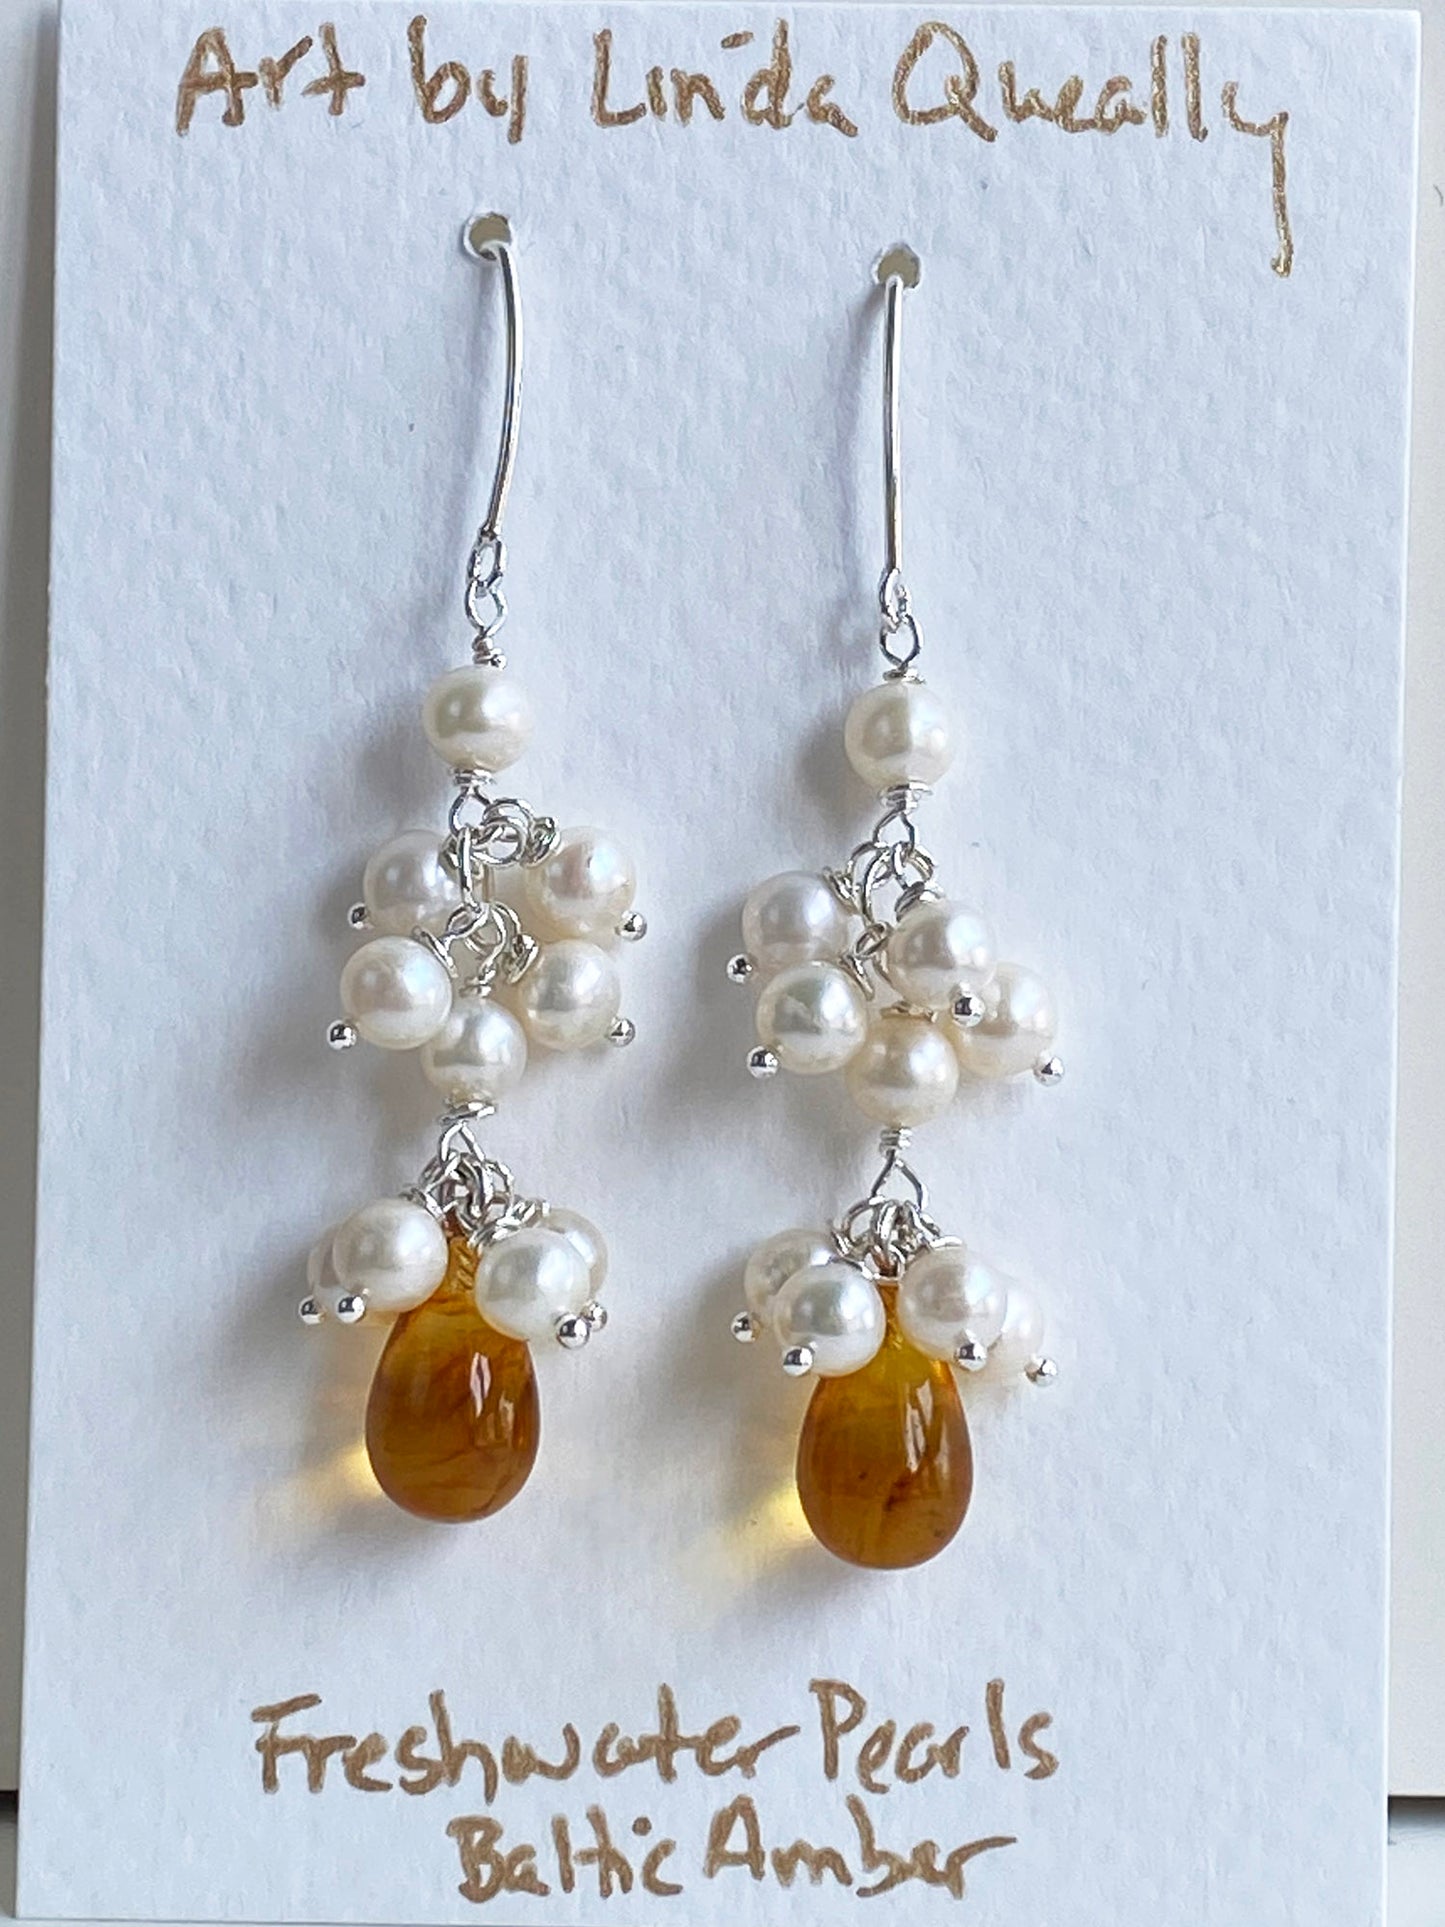 White Cluster Pearl Earrings with an Amber Drop by Linda Queally